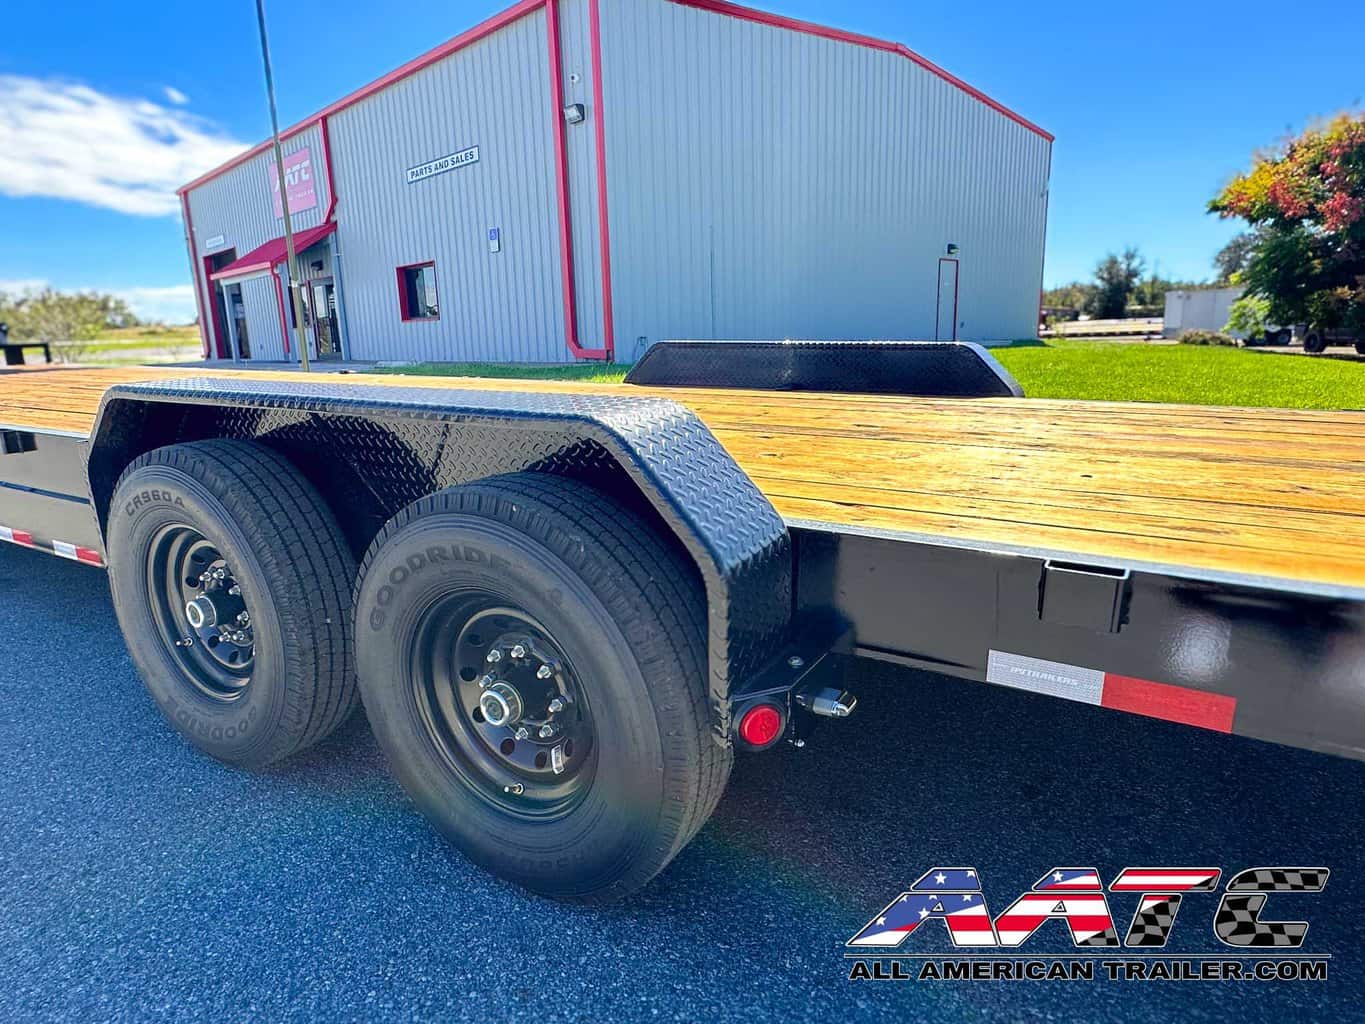 A versatile PJ 34-foot bumper pull car hauler trailer, model C8-342, designed for transporting two cars, or a bobcat and more. This PJ Trailer features slide-in ramps, large tires, and a 14,000 GVWR, making it suitable for multi-car hauling. With electric brakes, a black finish, and a load capacity of 9185 lbs, it's a robust choice for various hauling needs. The bumper pull design provides convenient towing.